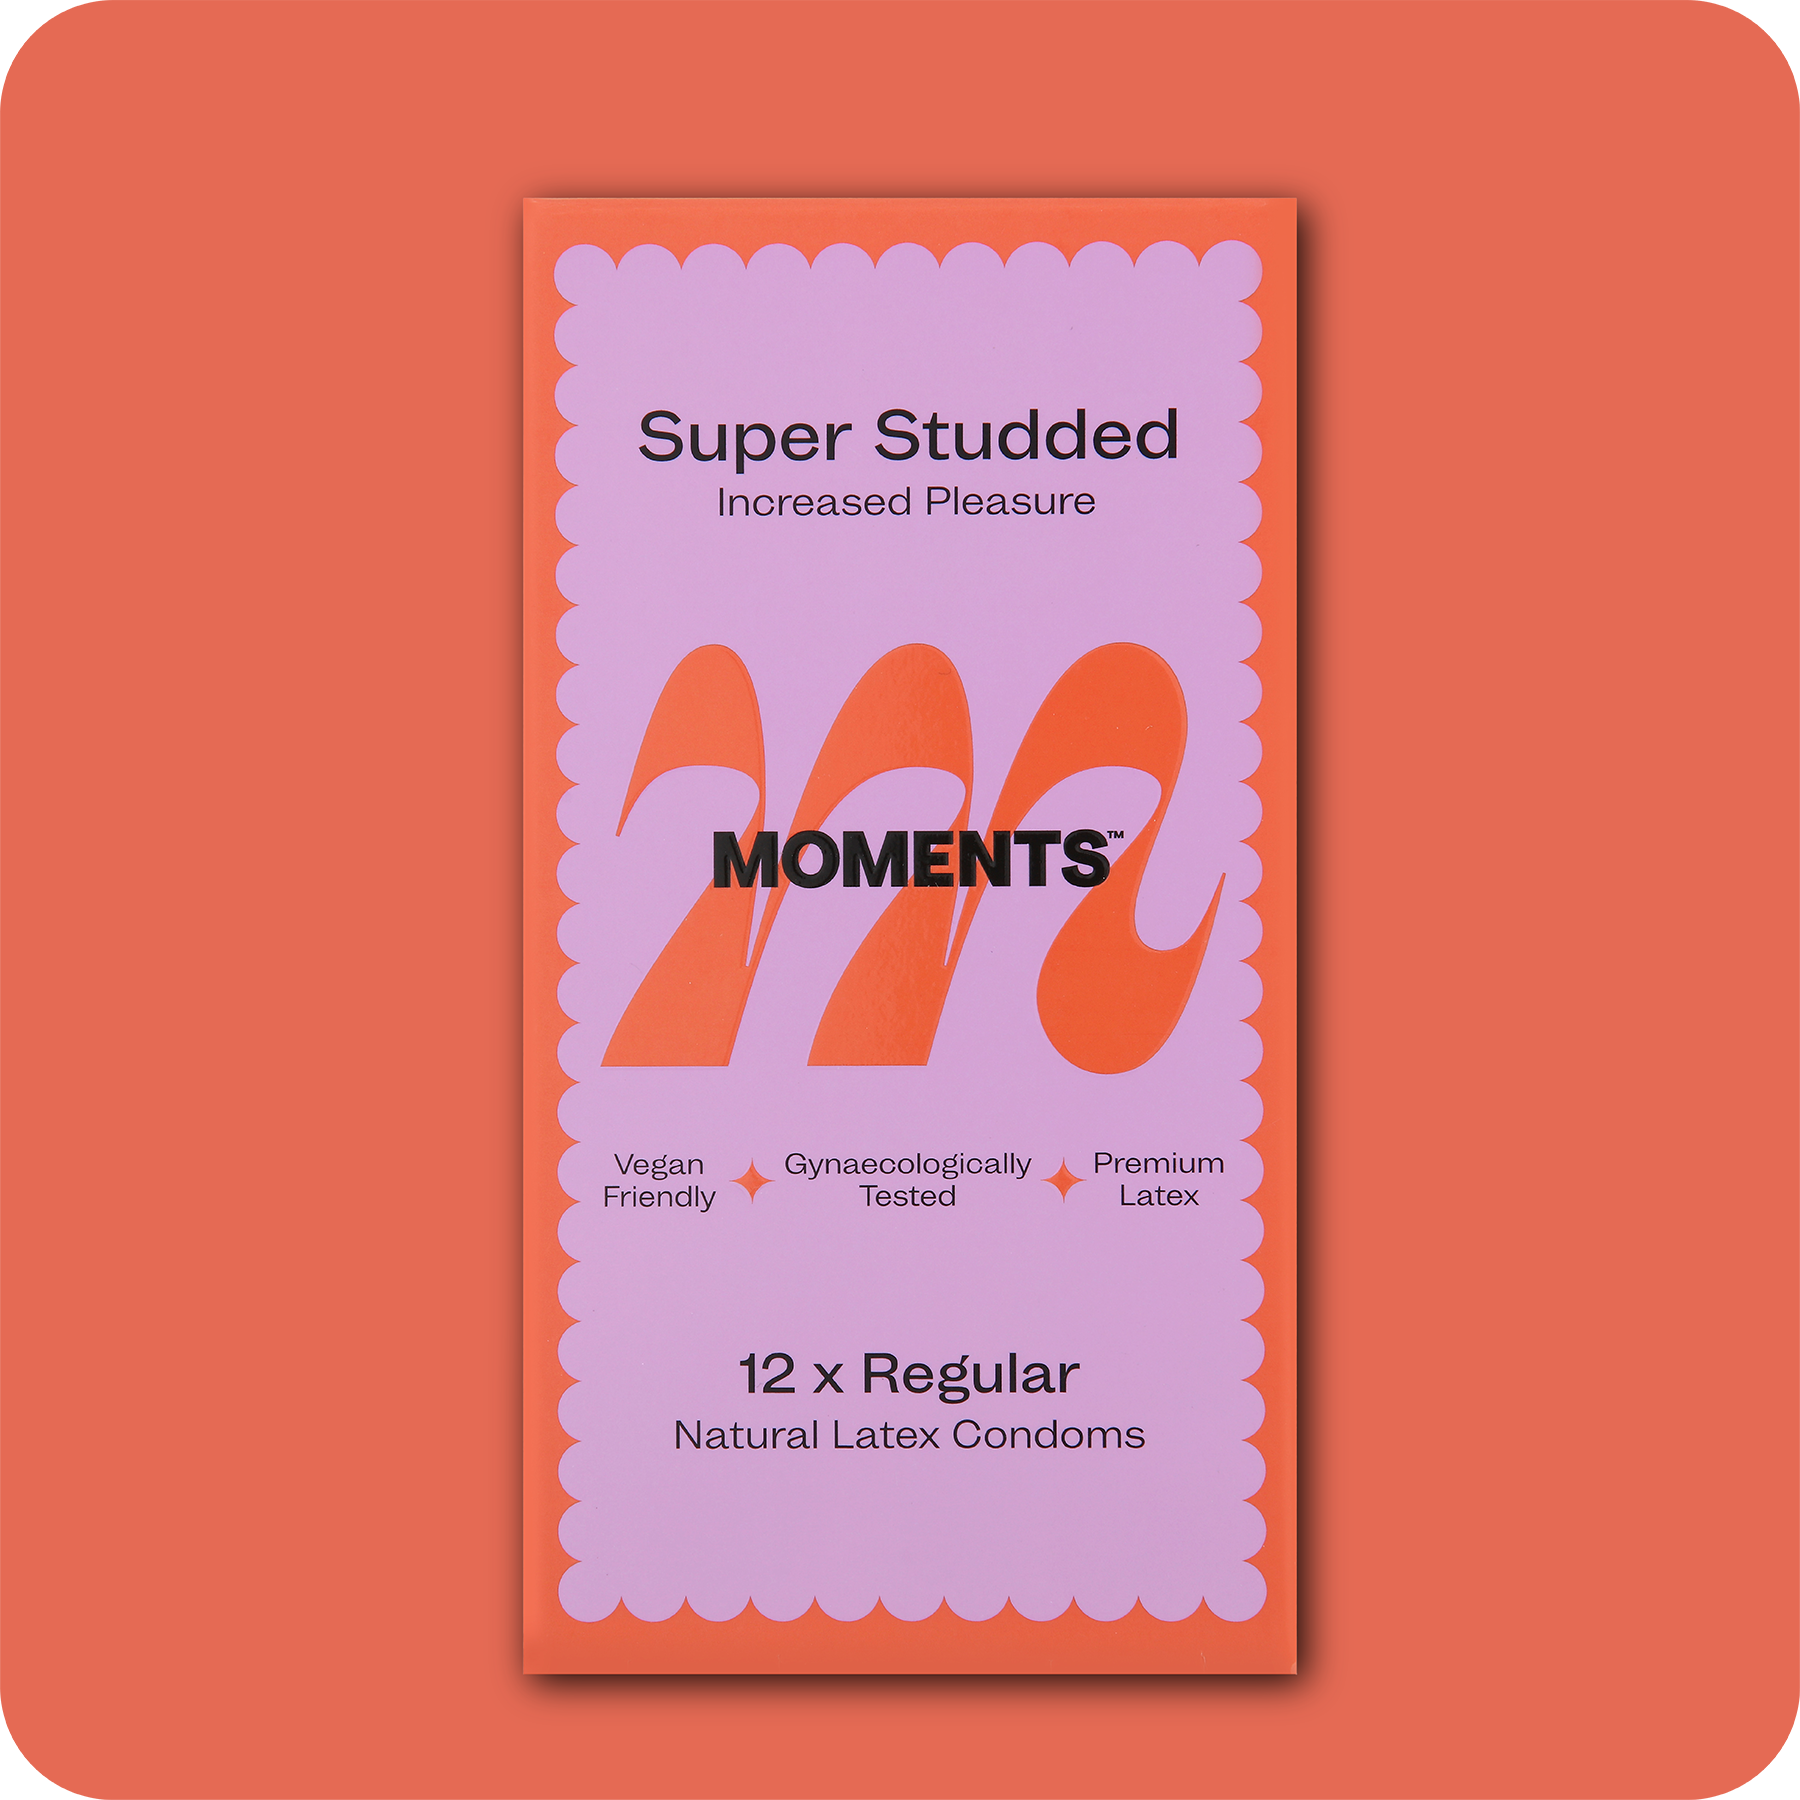 Moments Super Studded condom box with the product name prominently displayed